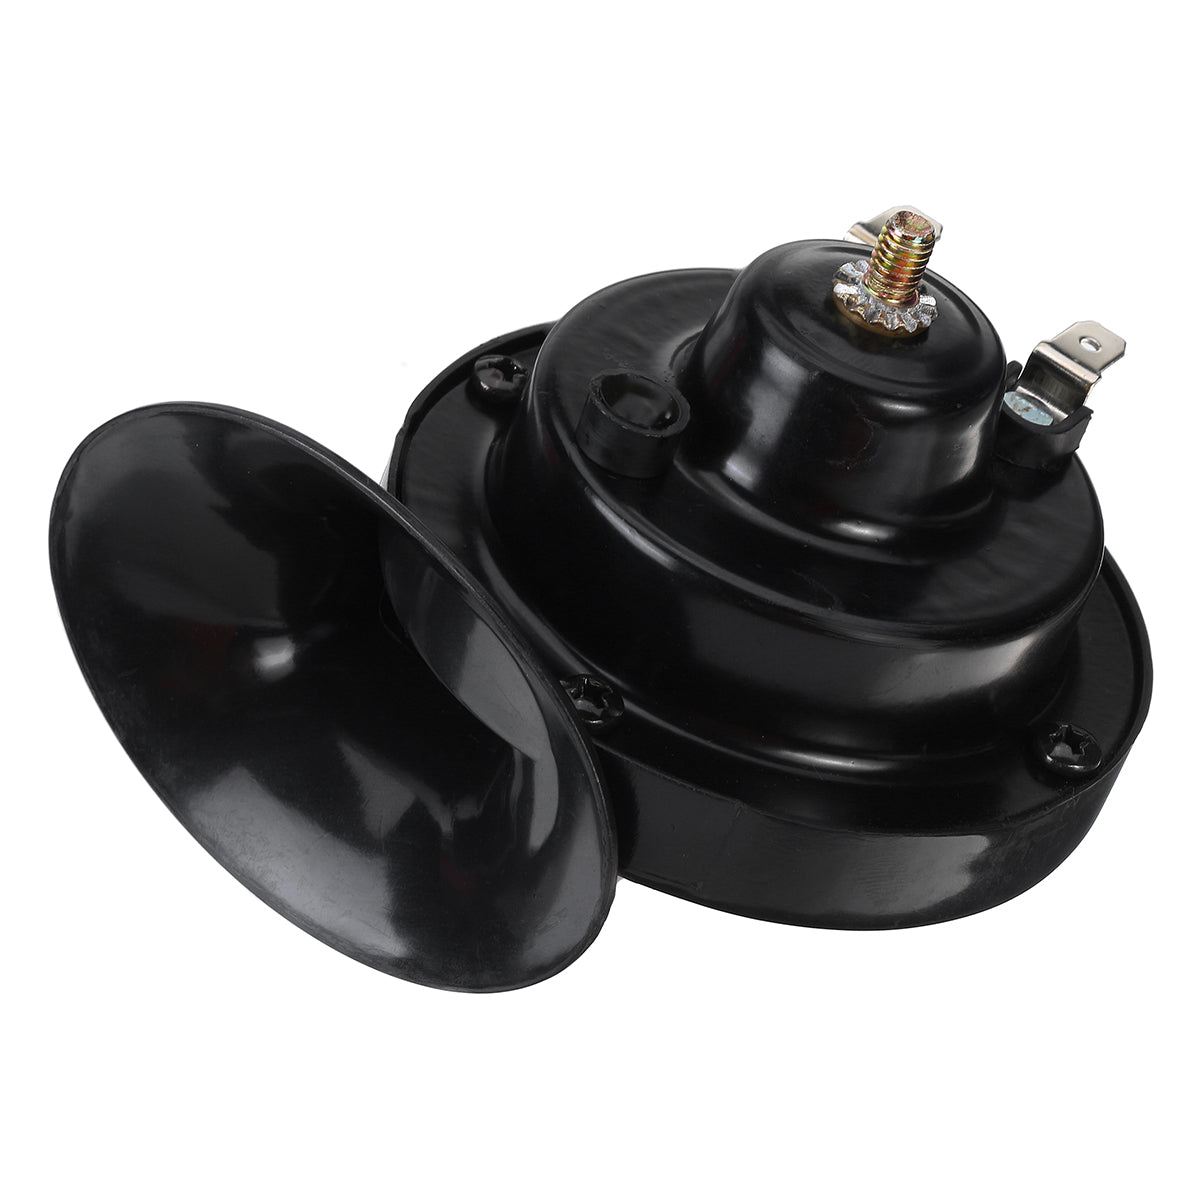 1 Pair 400DB 12V Universal Loud Electric Snail Horn Air Horn Raging Sound For Car Motorcycle Truck Boat - Auto GoShop